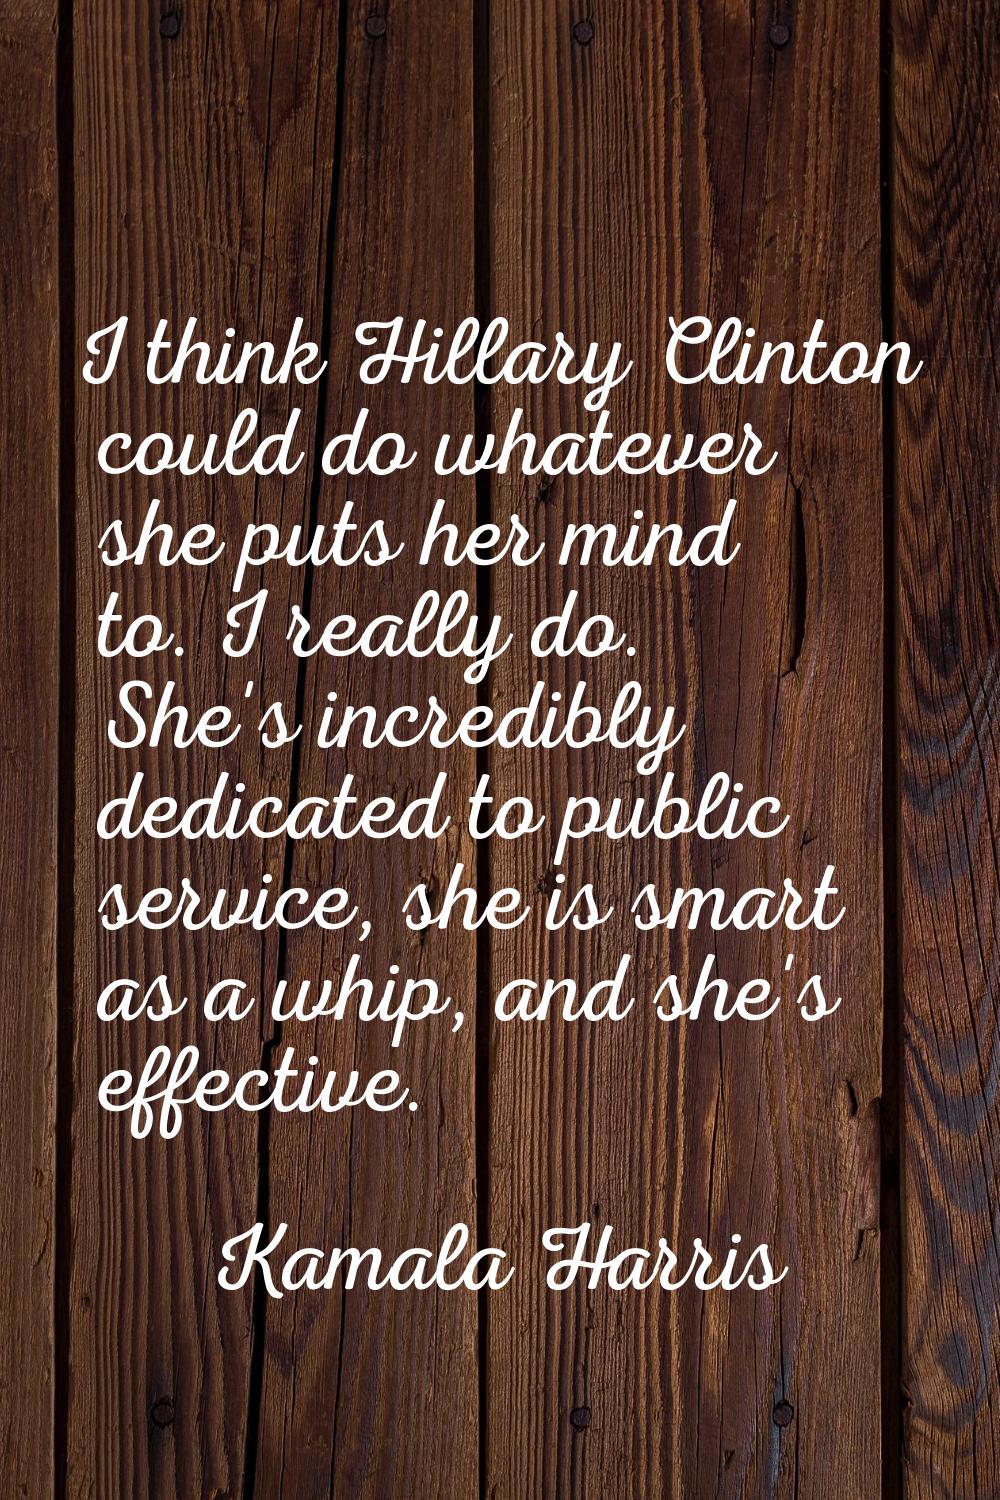 I think Hillary Clinton could do whatever she puts her mind to. I really do. She's incredibly dedic